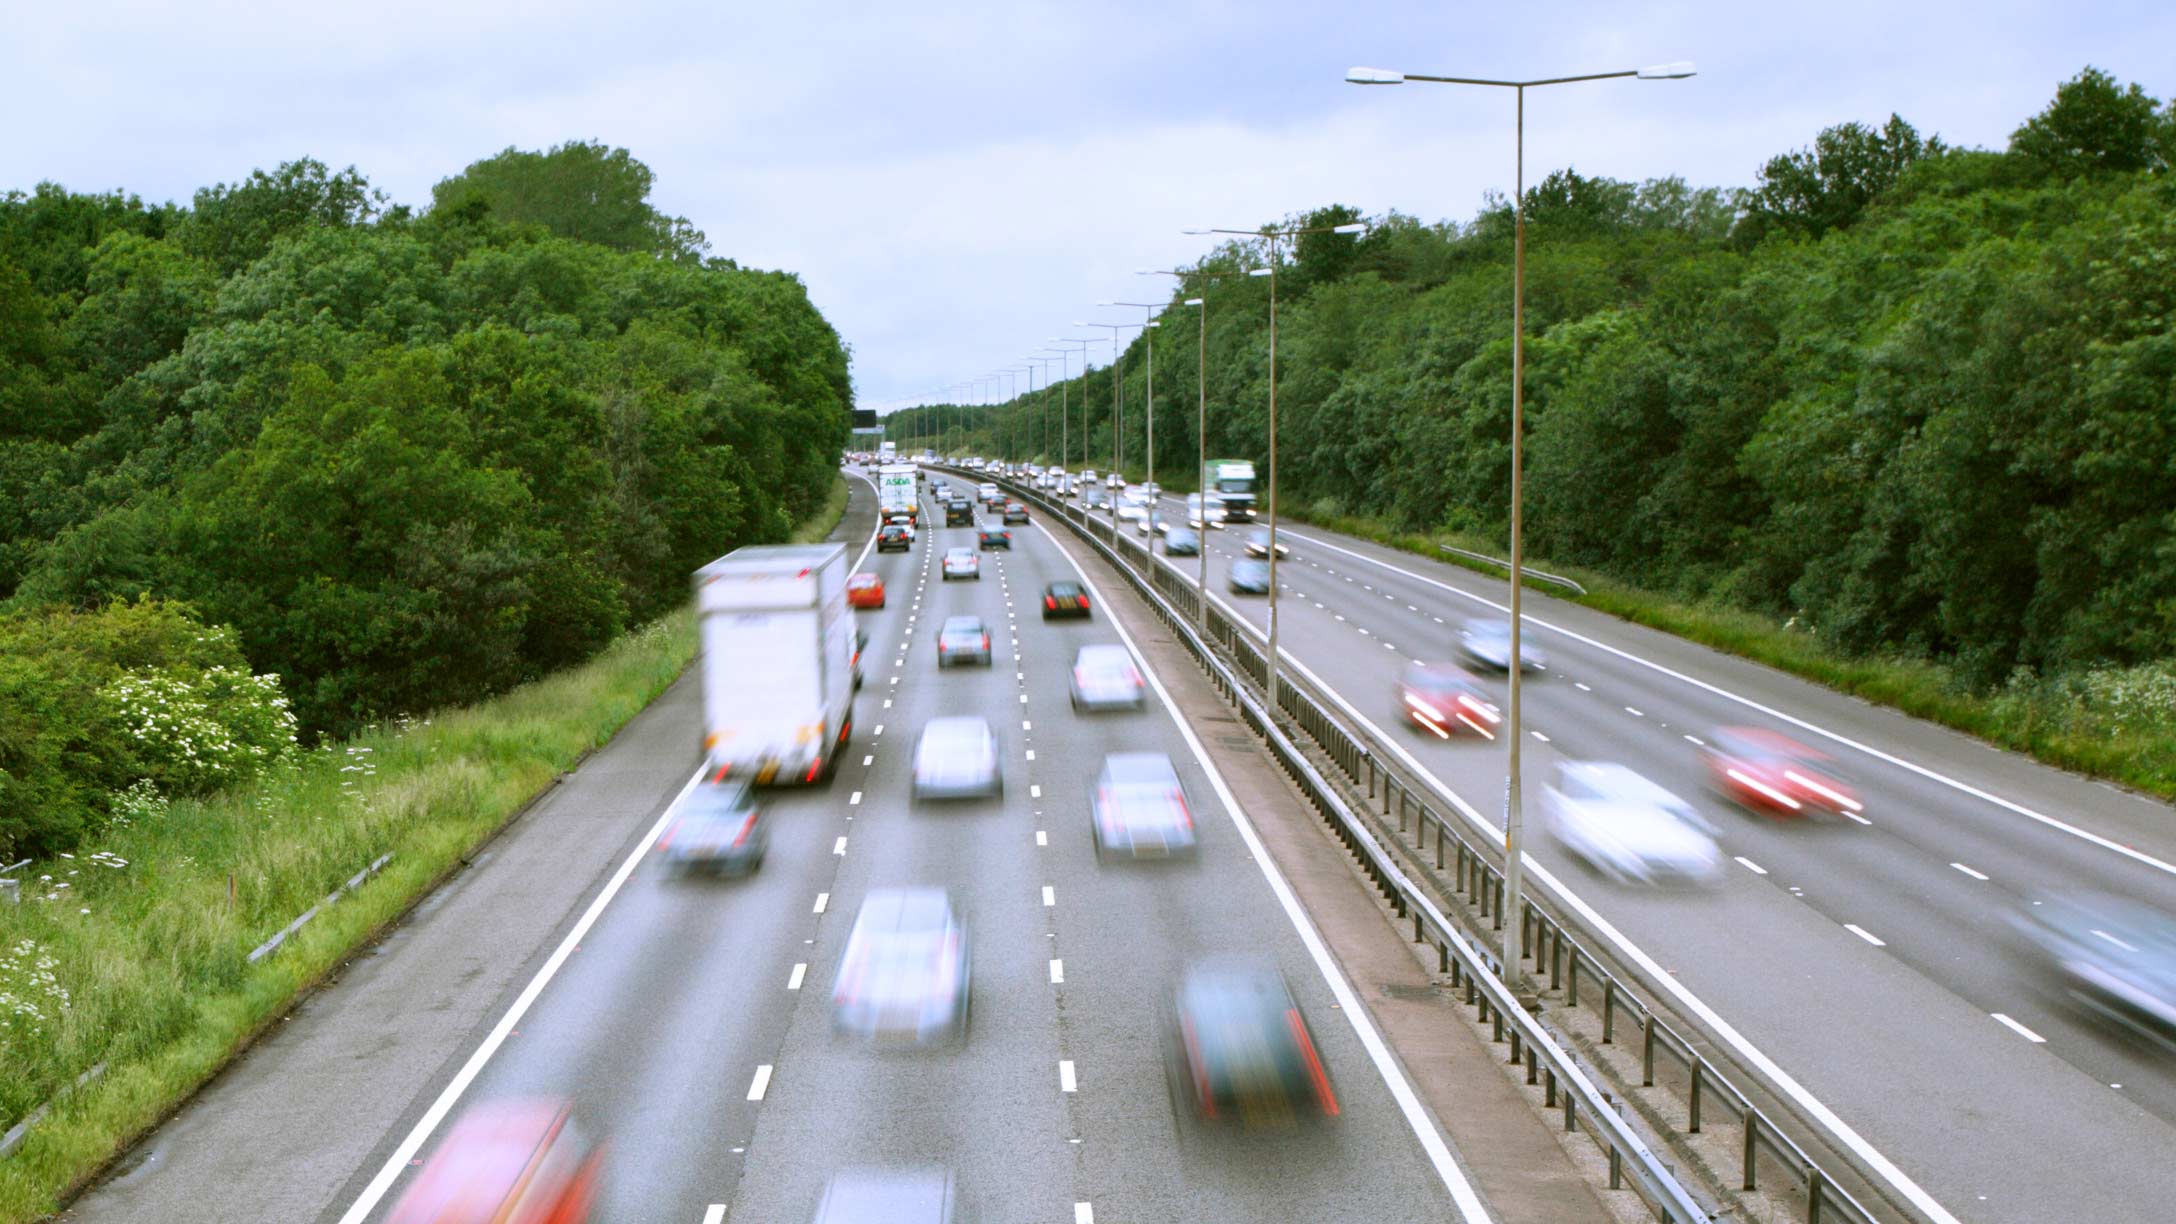 Image of vehicles driving fast on a highway